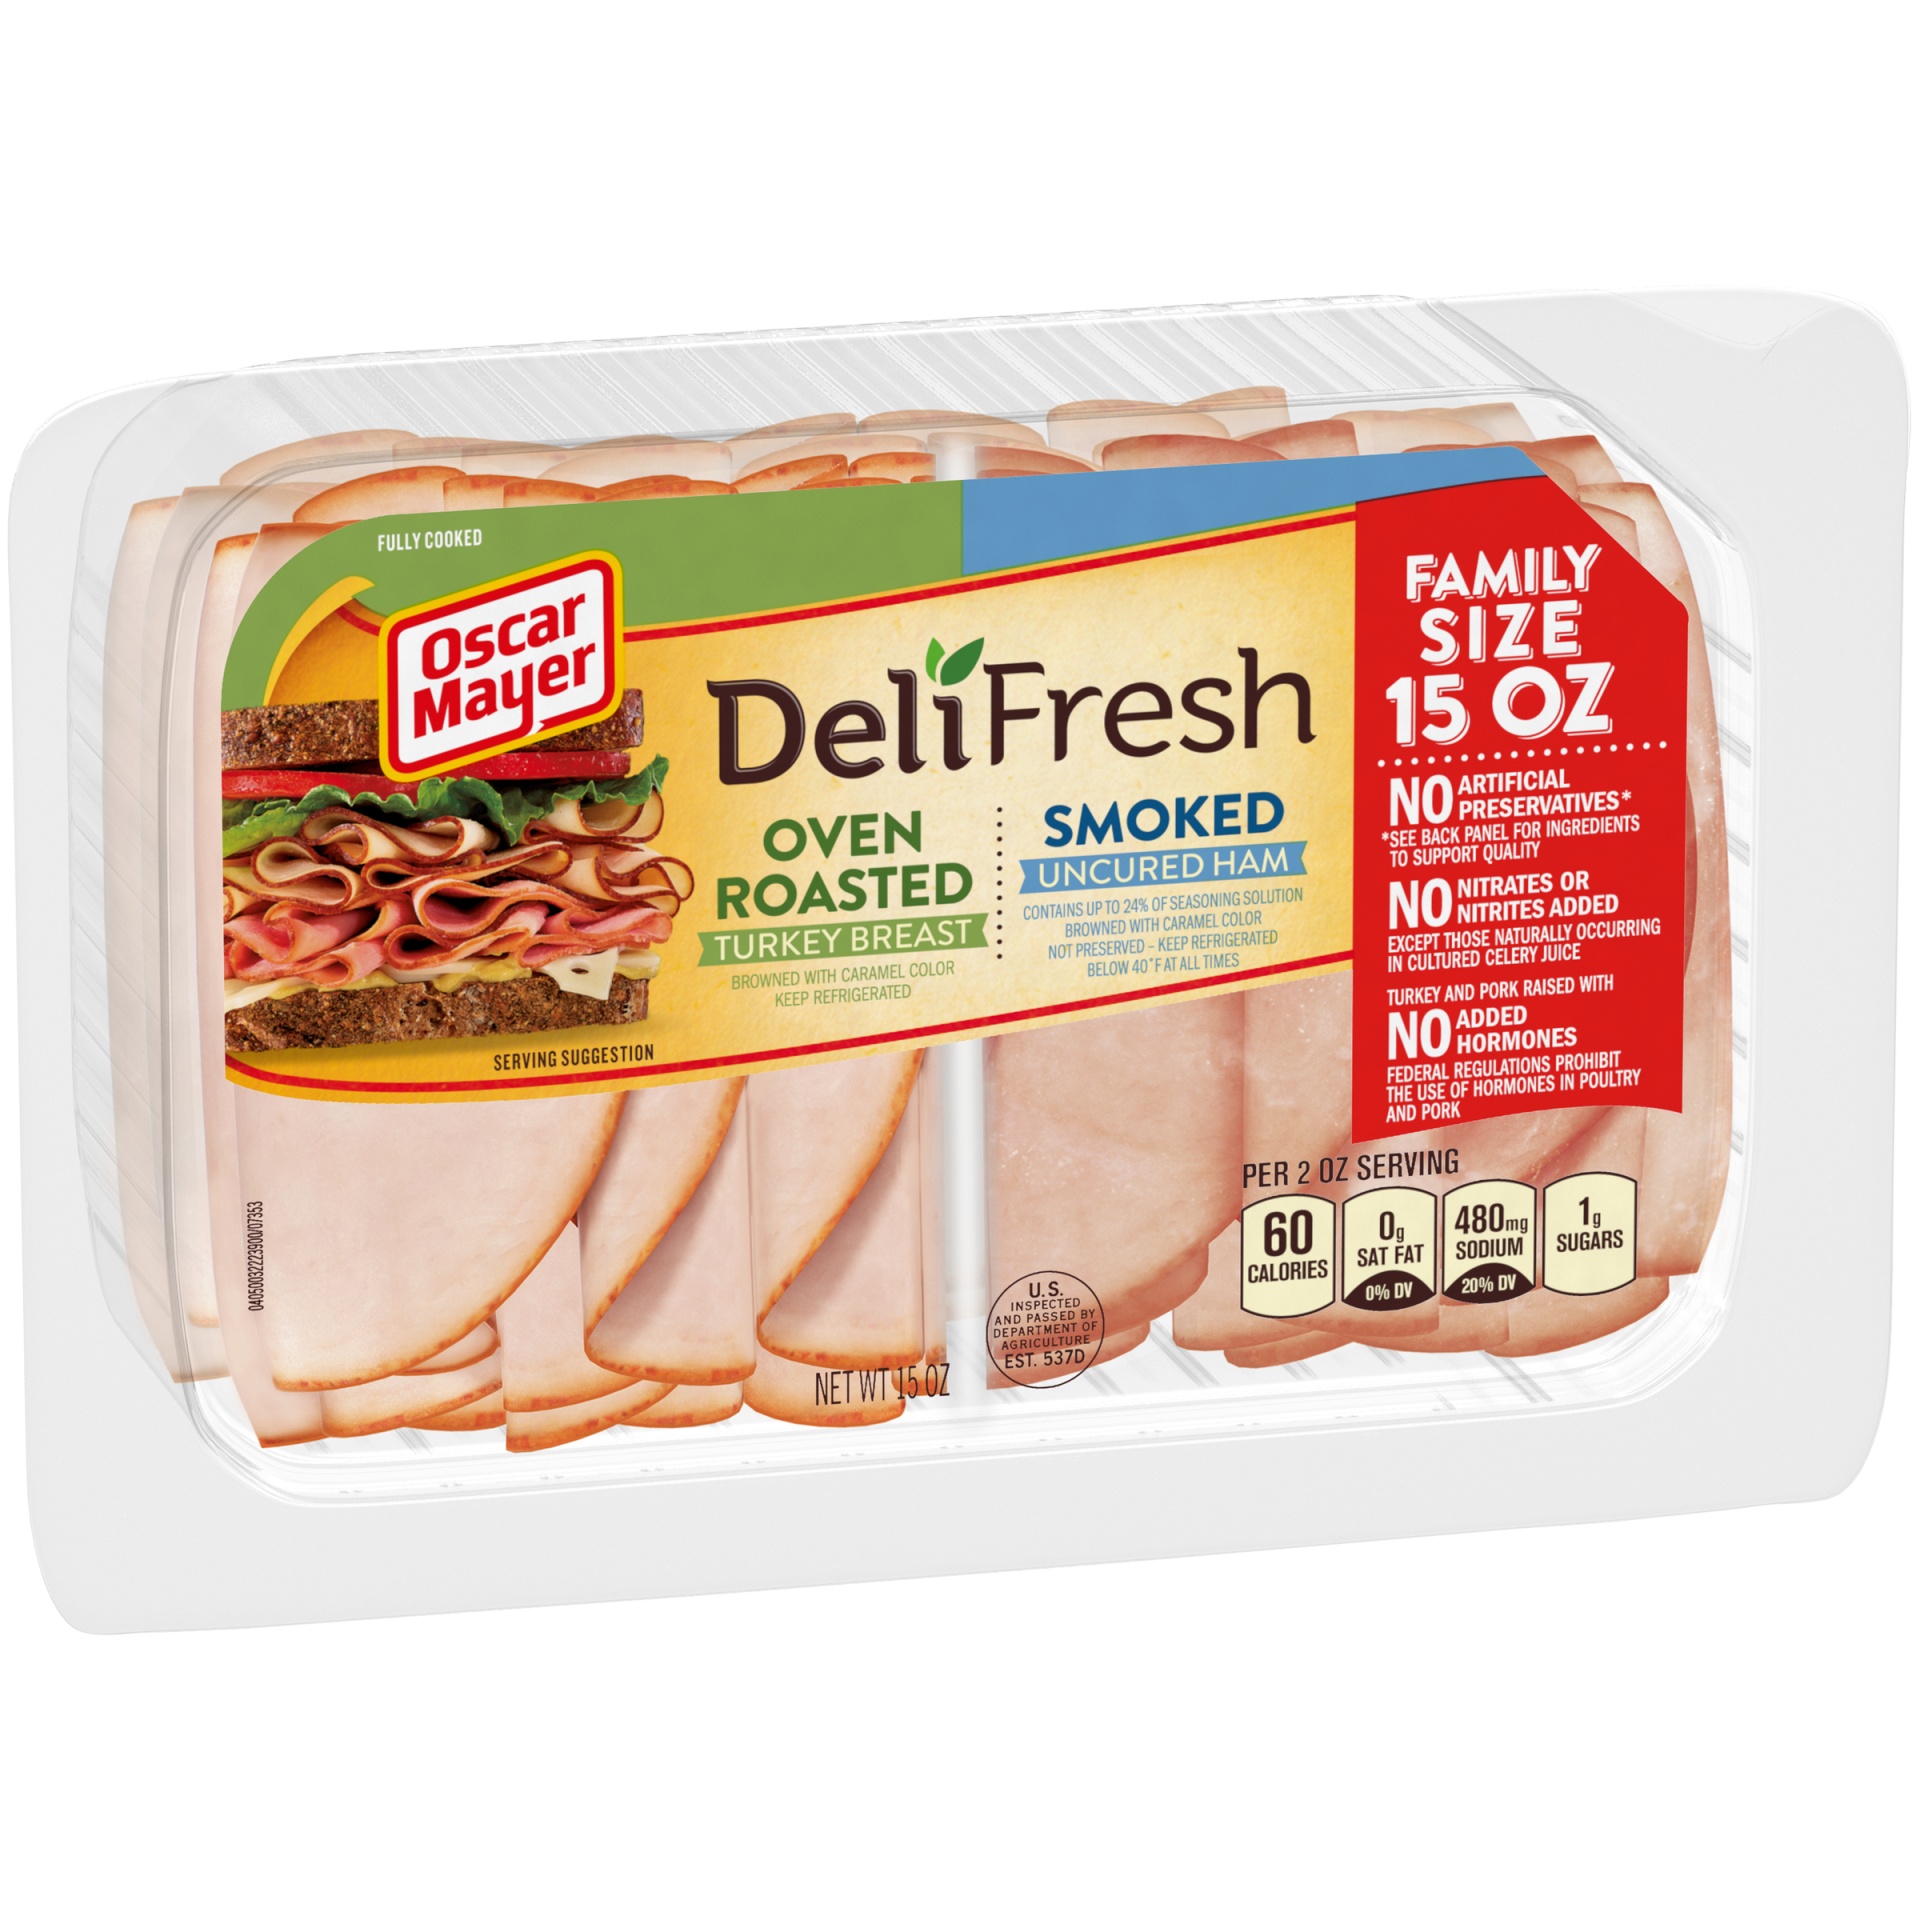 slide 4 of 6, Oscar Mayer Deli Fresh Oven Roasted Turkey Breast & Smoked Uncured Ham Sliced Lunch Meat Variety Pack Family Size Tray, 15 oz